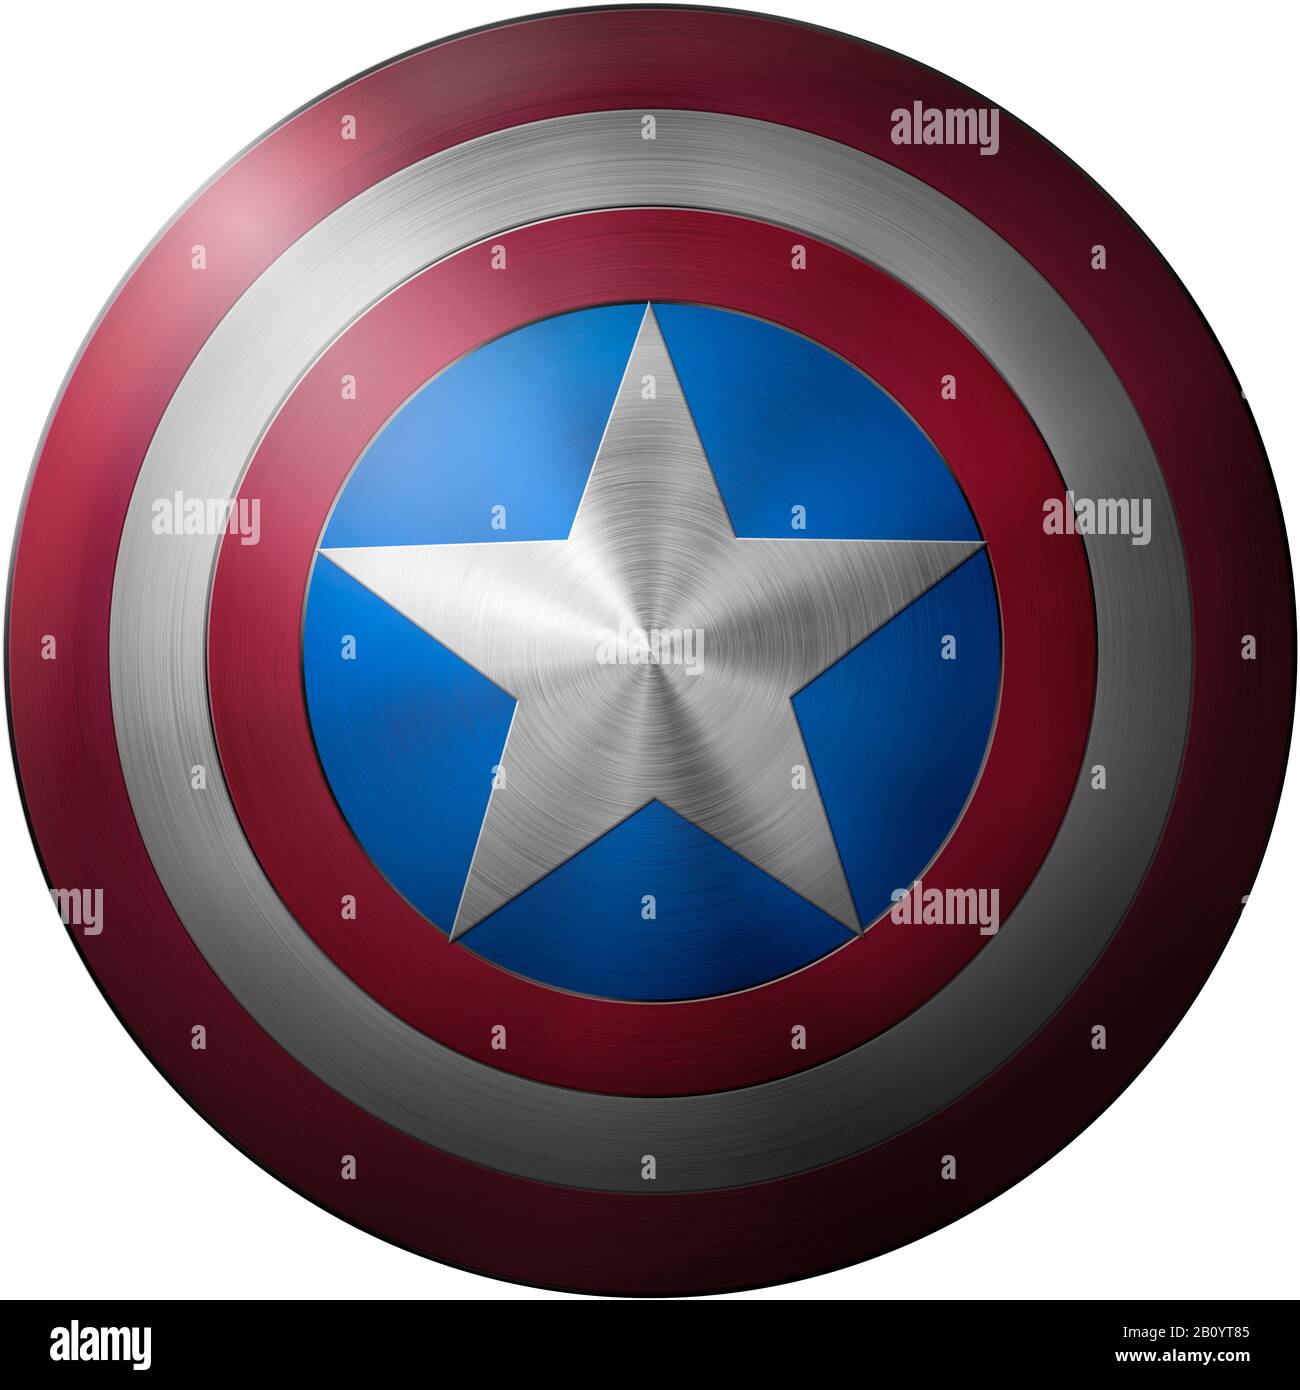 How To Draw Captain America Shield Step by Step  5 Easy Phase